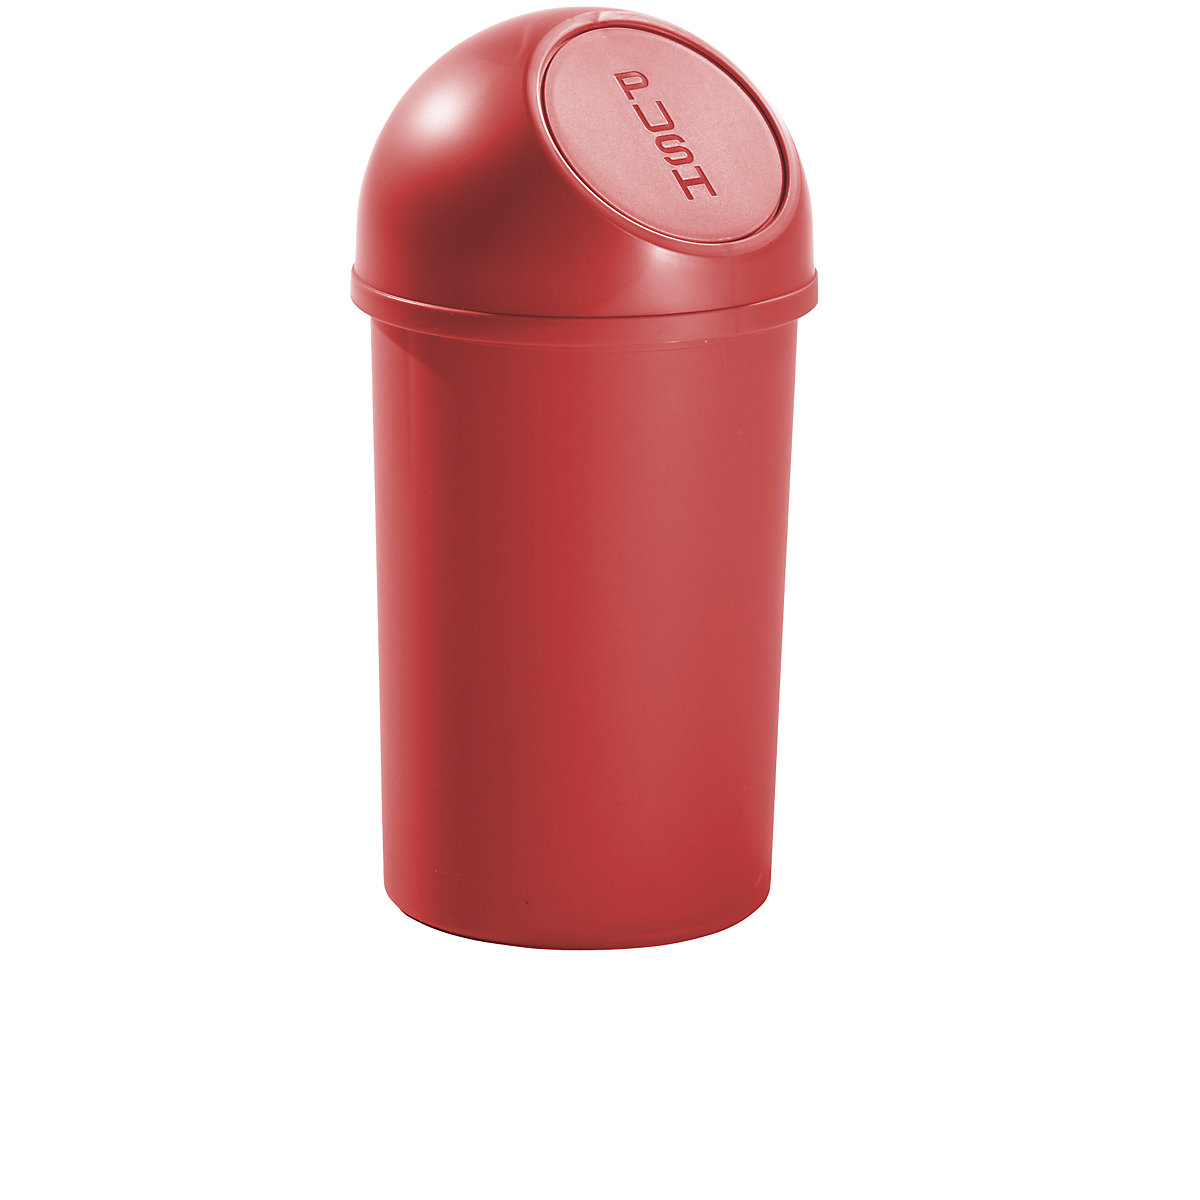 Push top waste bin made of plastic – helit, capacity 13 l, pack of 6, HxØ 490 x 252 mm, red-4